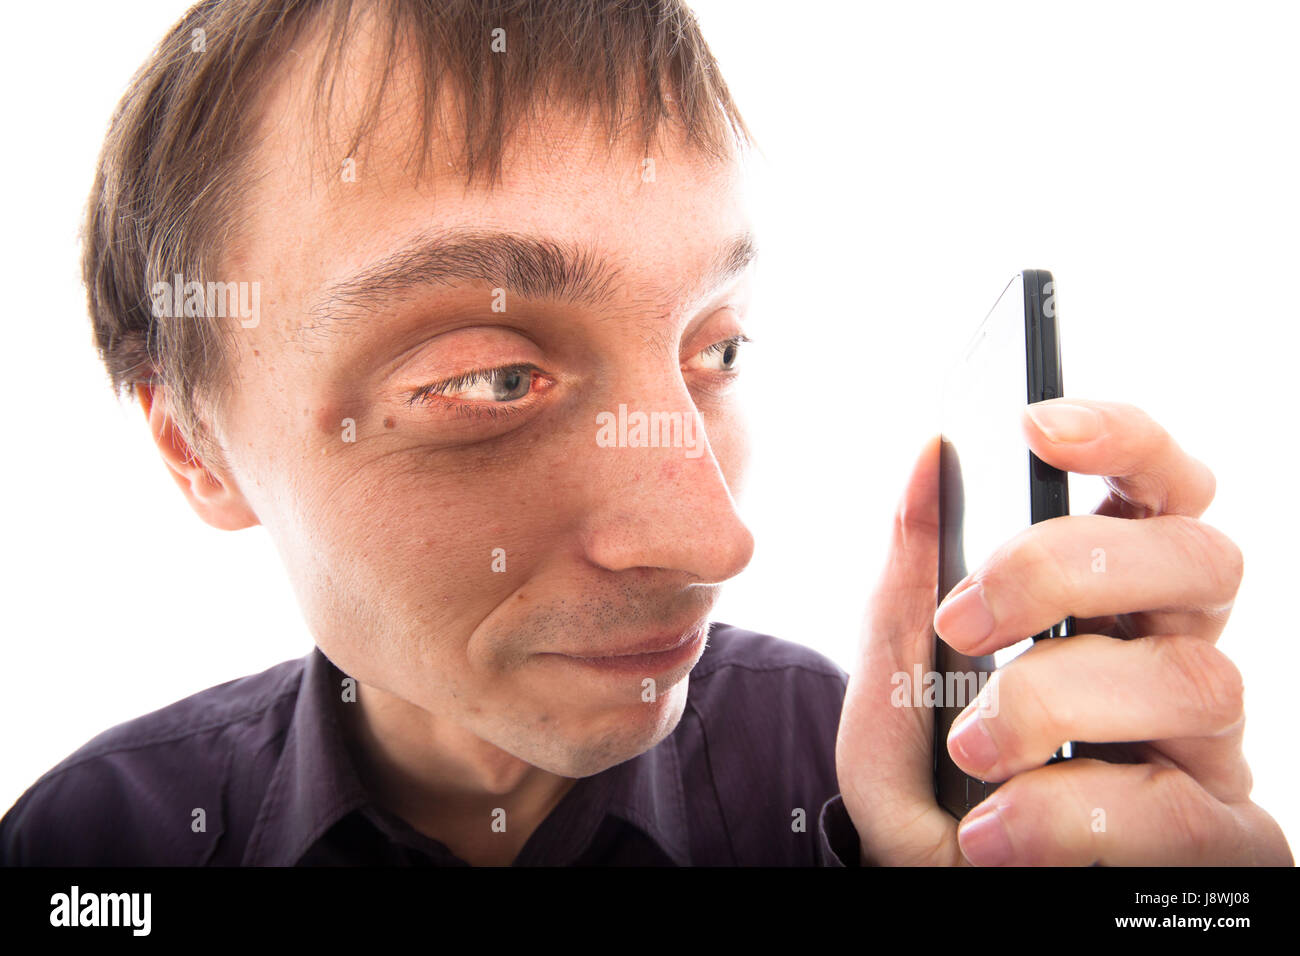 telephone, phone, cellphone, mobile, mobile phone, ugly, man, guy, telephone, Stock Photo